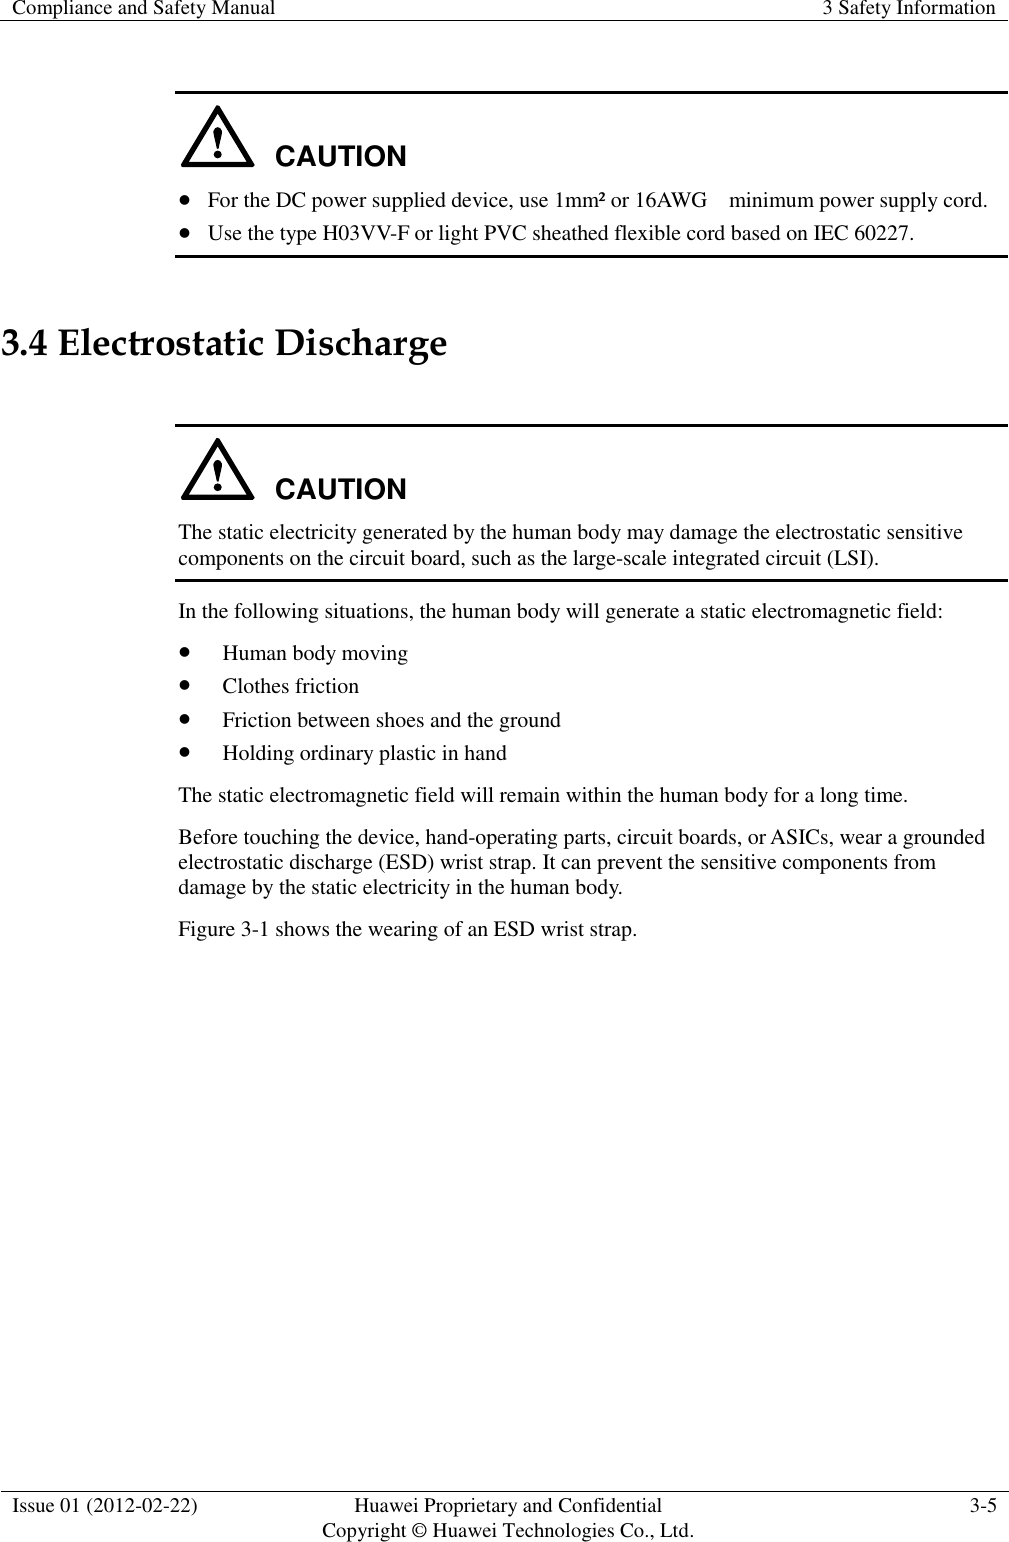 Compliance and Safety Manual 3 Safety Information  Issue 01 (2012-02-22) Huawei Proprietary and Confidential           Copyright © Huawei Technologies Co., Ltd. 3-5   CAUTION  For the DC power supplied device, use 1mm² or 16AWG    minimum power supply cord.  Use the type H03VV-F or light PVC sheathed flexible cord based on IEC 60227. 3.4 Electrostatic Discharge  CAUTION The static electricity generated by the human body may damage the electrostatic sensitive components on the circuit board, such as the large-scale integrated circuit (LSI). In the following situations, the human body will generate a static electromagnetic field:  Human body moving  Clothes friction  Friction between shoes and the ground  Holding ordinary plastic in hand The static electromagnetic field will remain within the human body for a long time. Before touching the device, hand-operating parts, circuit boards, or ASICs, wear a grounded electrostatic discharge (ESD) wrist strap. It can prevent the sensitive components from damage by the static electricity in the human body. Figure 3-1 shows the wearing of an ESD wrist strap. 